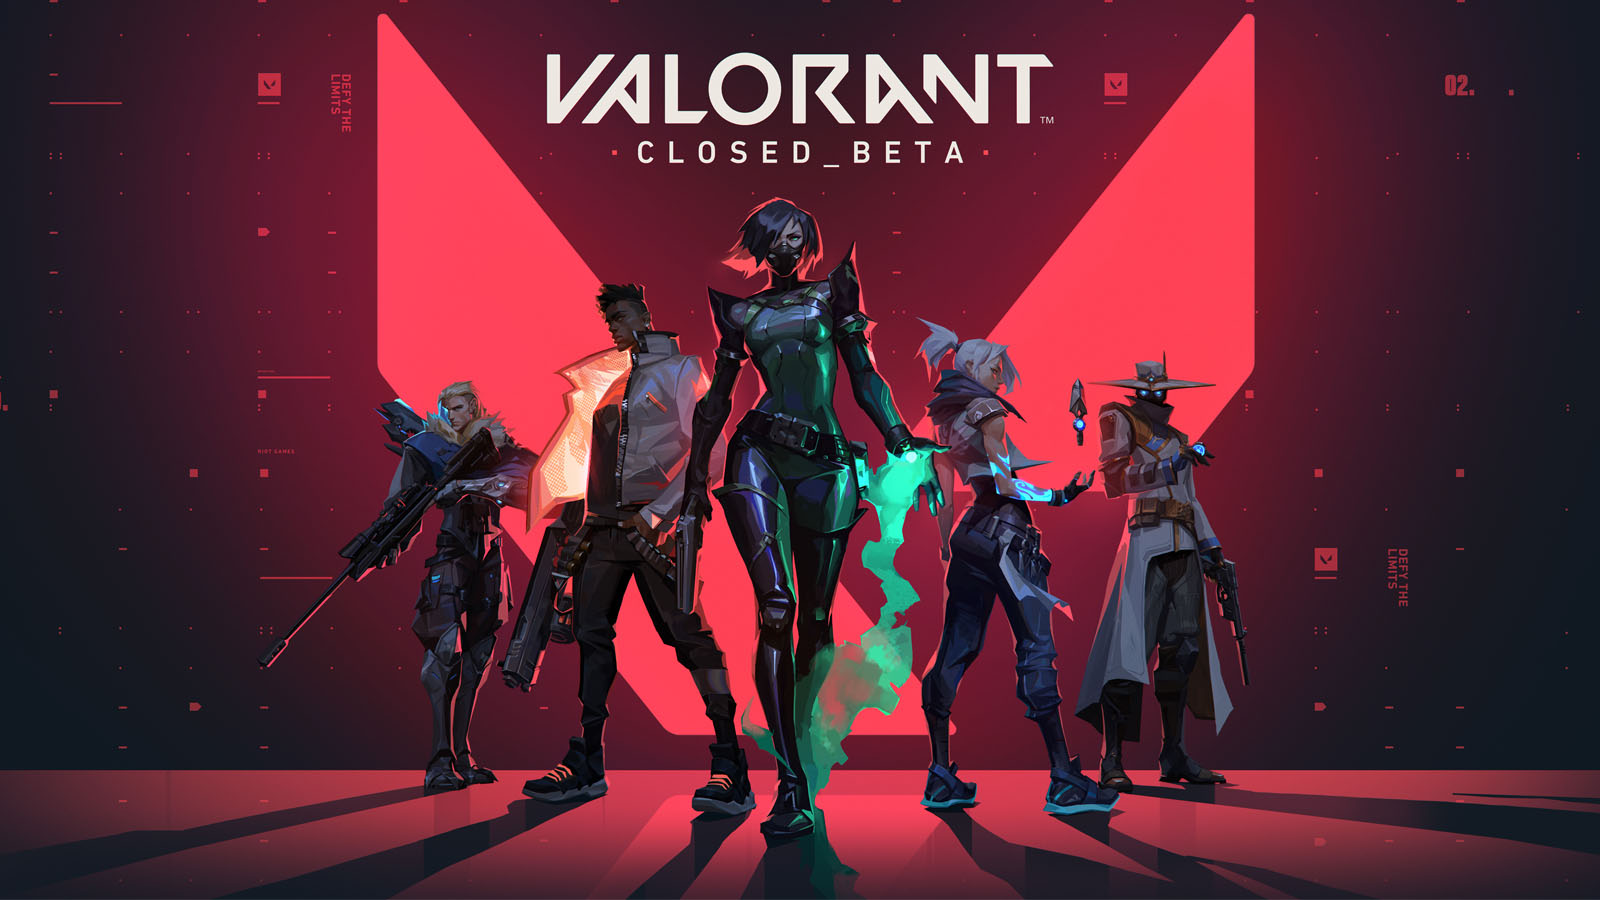 Riot Games announces details for the Closed Beta of their highly anticipated new game Valorant — GAMINGTREND